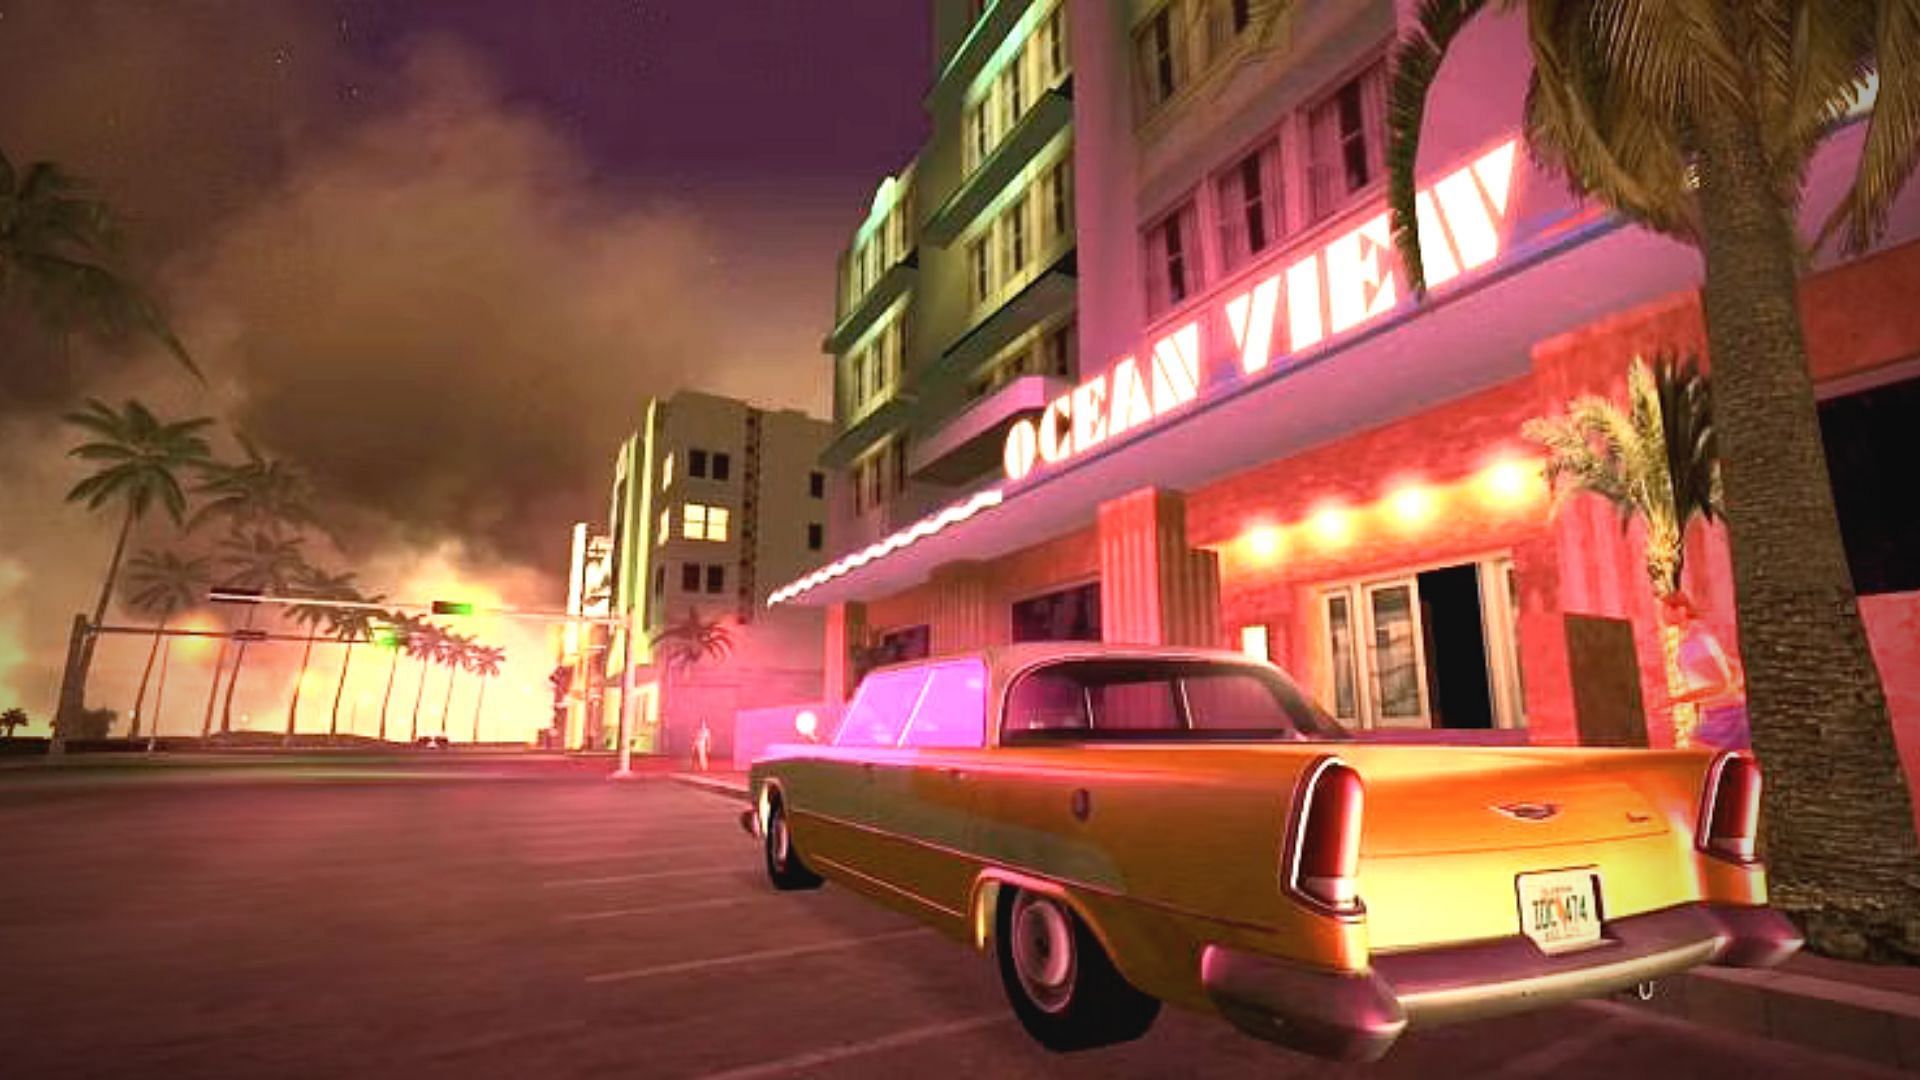 Is it real, or is it 'GTA V'? A trippy travelogue on the streets